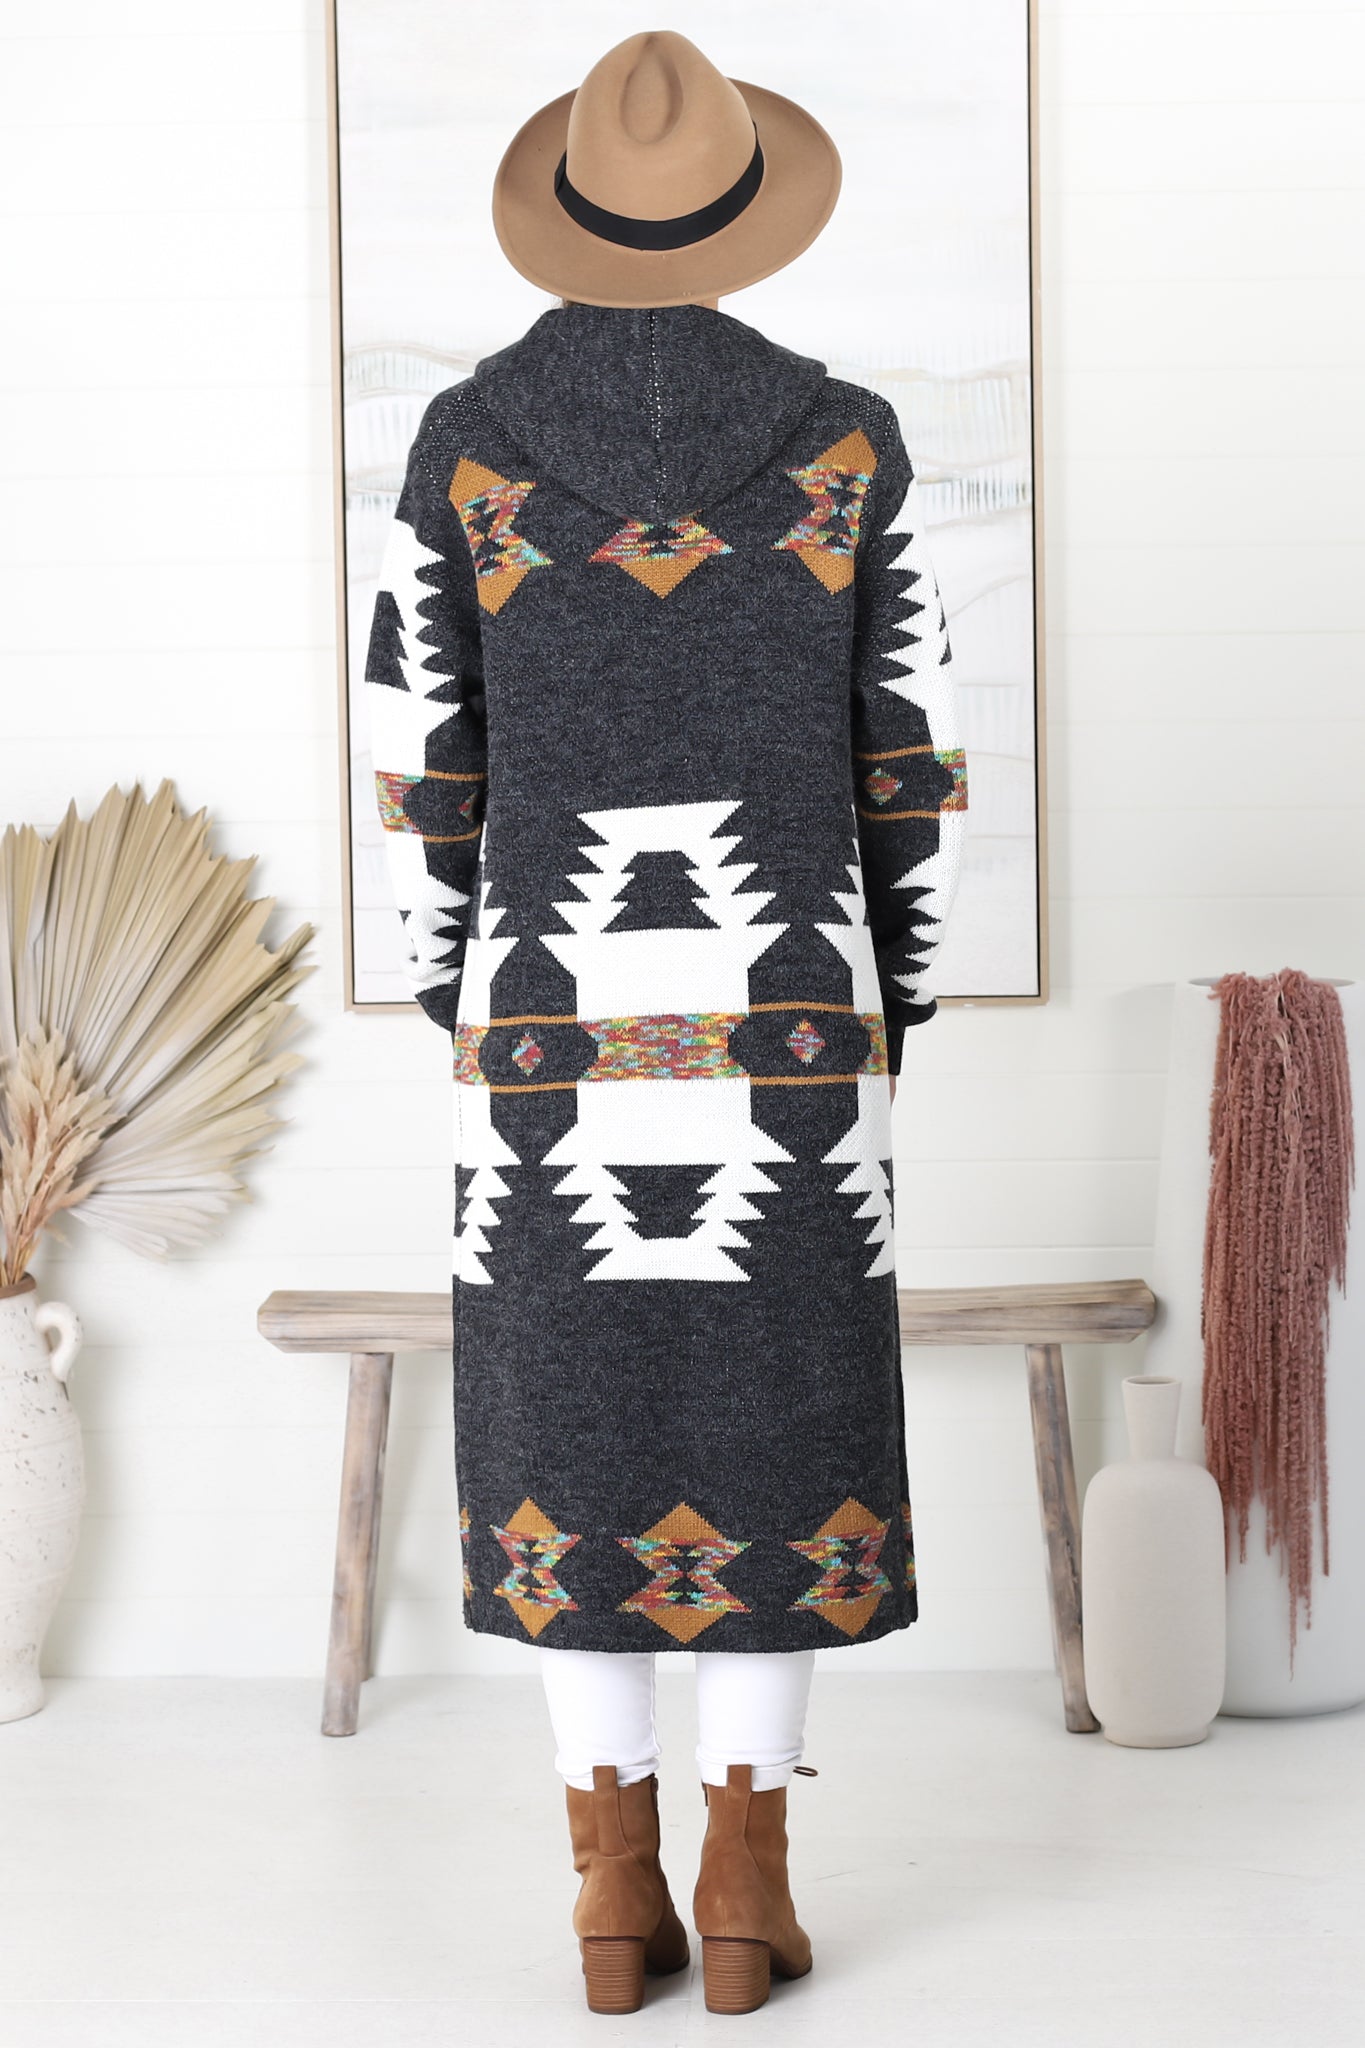 Quest Cardigan - Hooded Long Line Graphic Cardigan in Charcoal